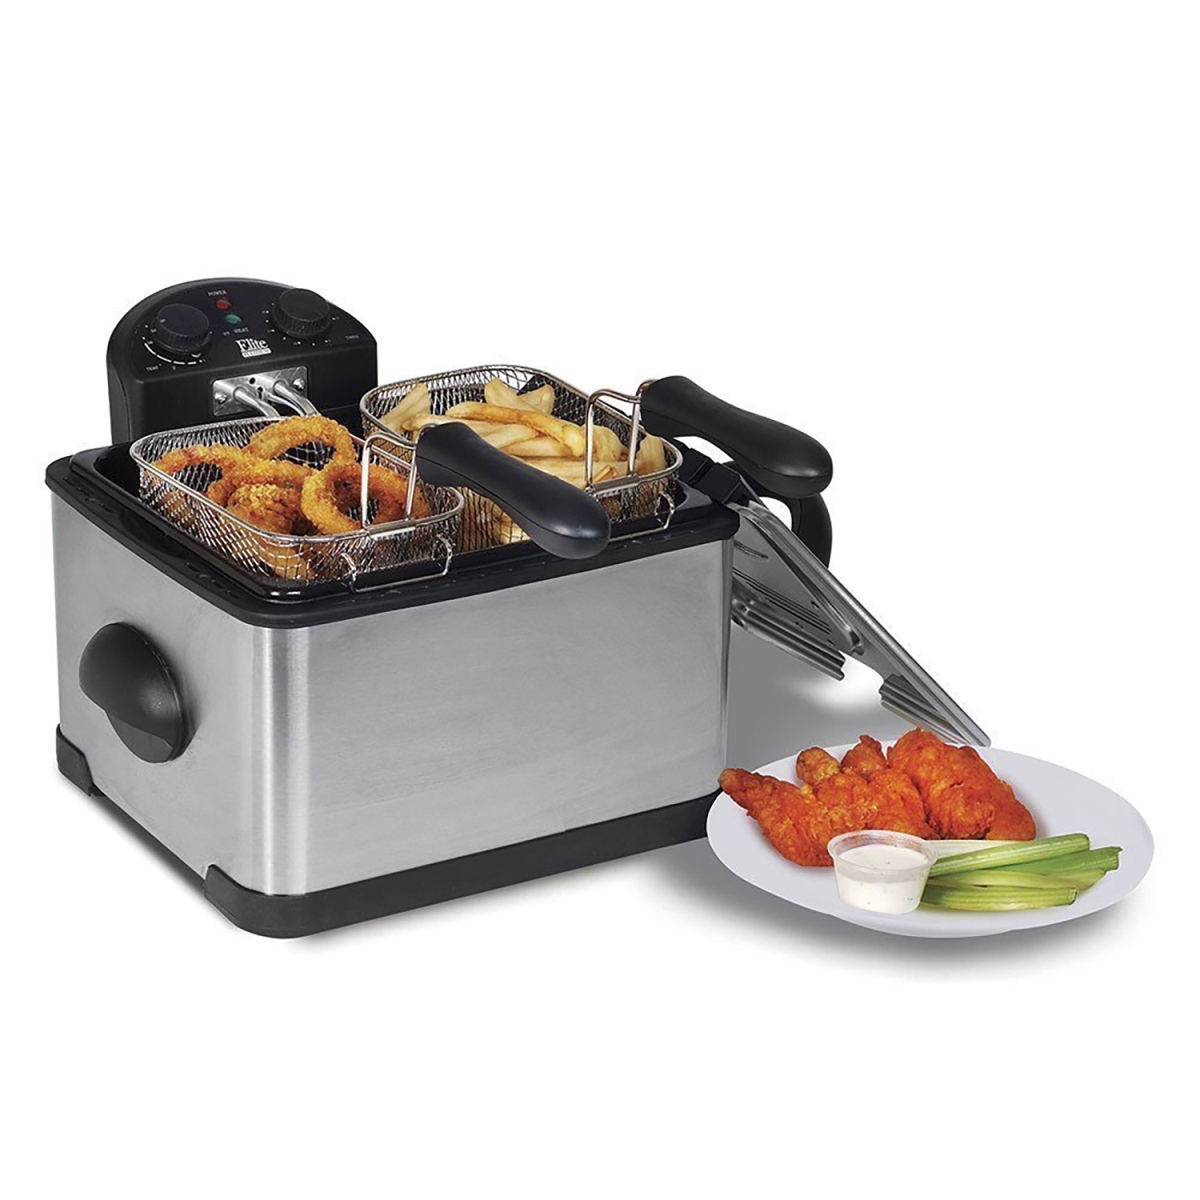 Edf401t 4 Qt. Maximatic Dual Basket Deep Fryer, Stainless Steel